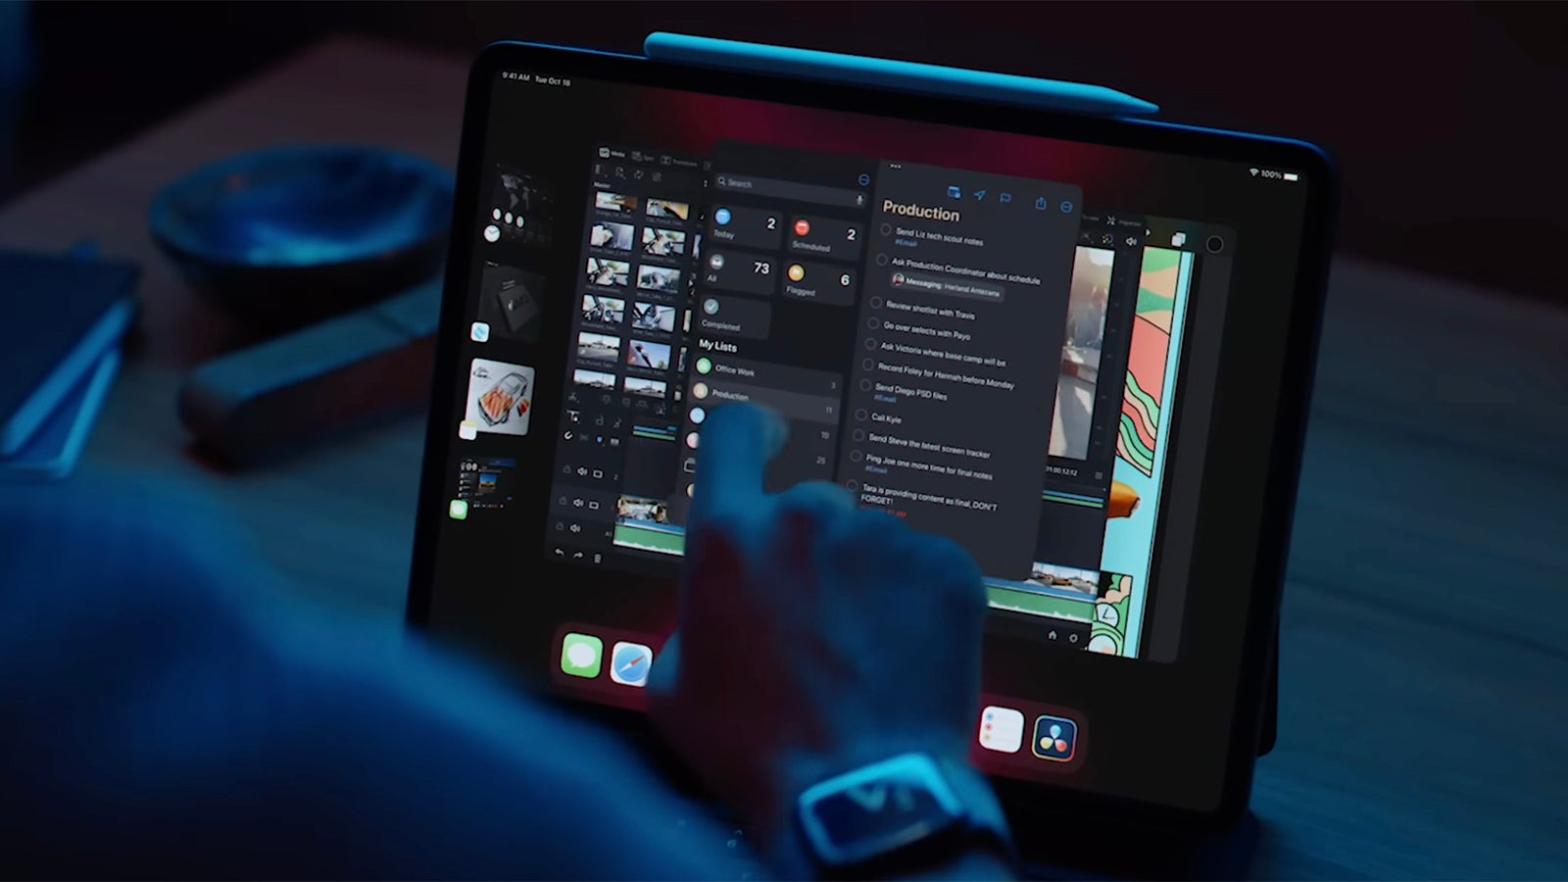 Stage Manager on the iPad. (Image: Apple)